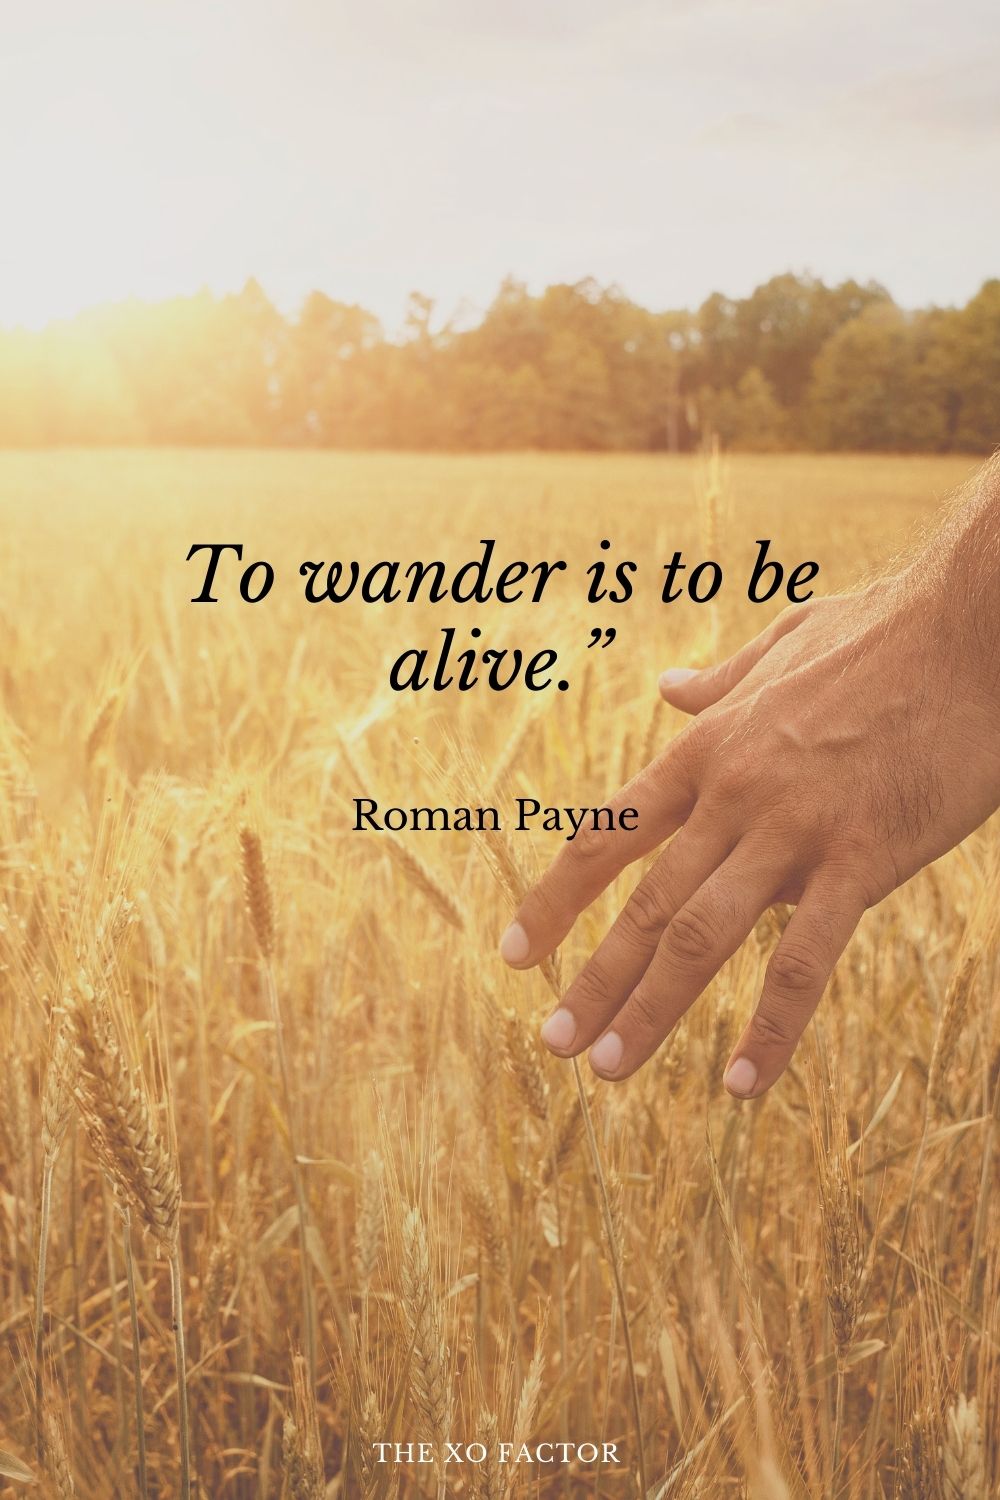 To wander is to be alive.” Roman Payne